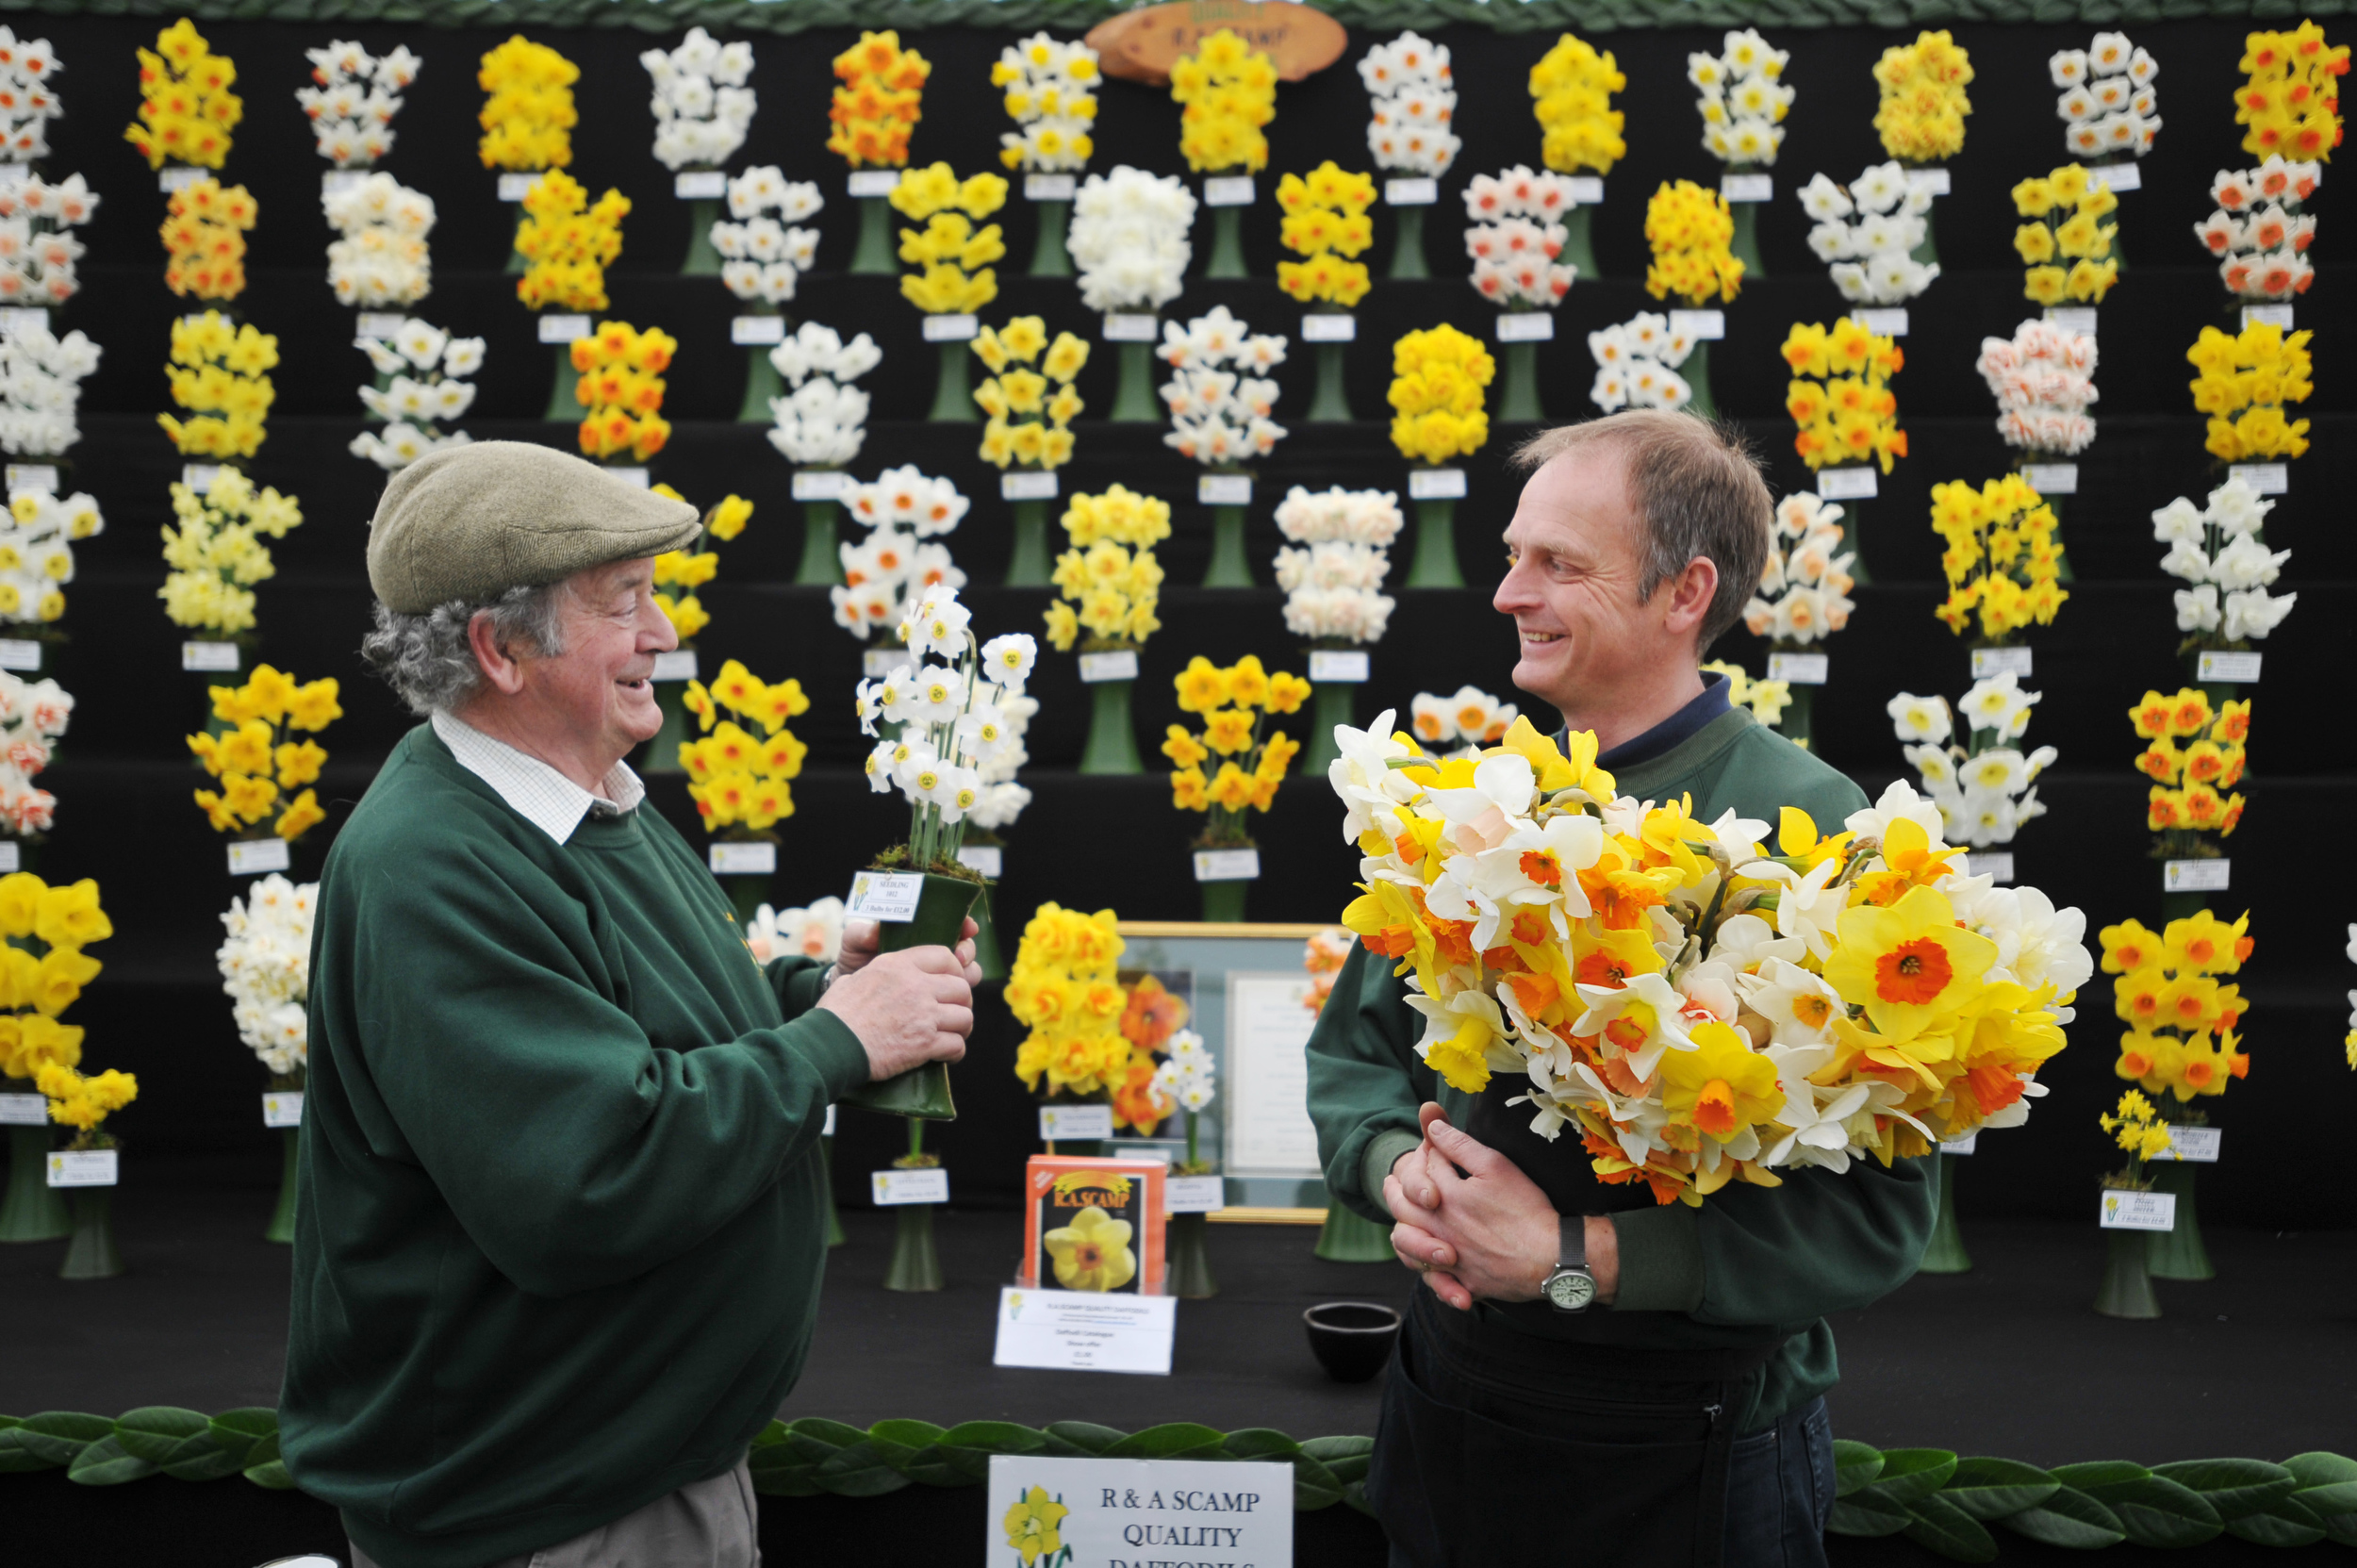 Ron Scamp (left) and his son Adrian with their daffodils at the RHS Flower Show Cardiff (Bethany Clarke/RHS/PA)